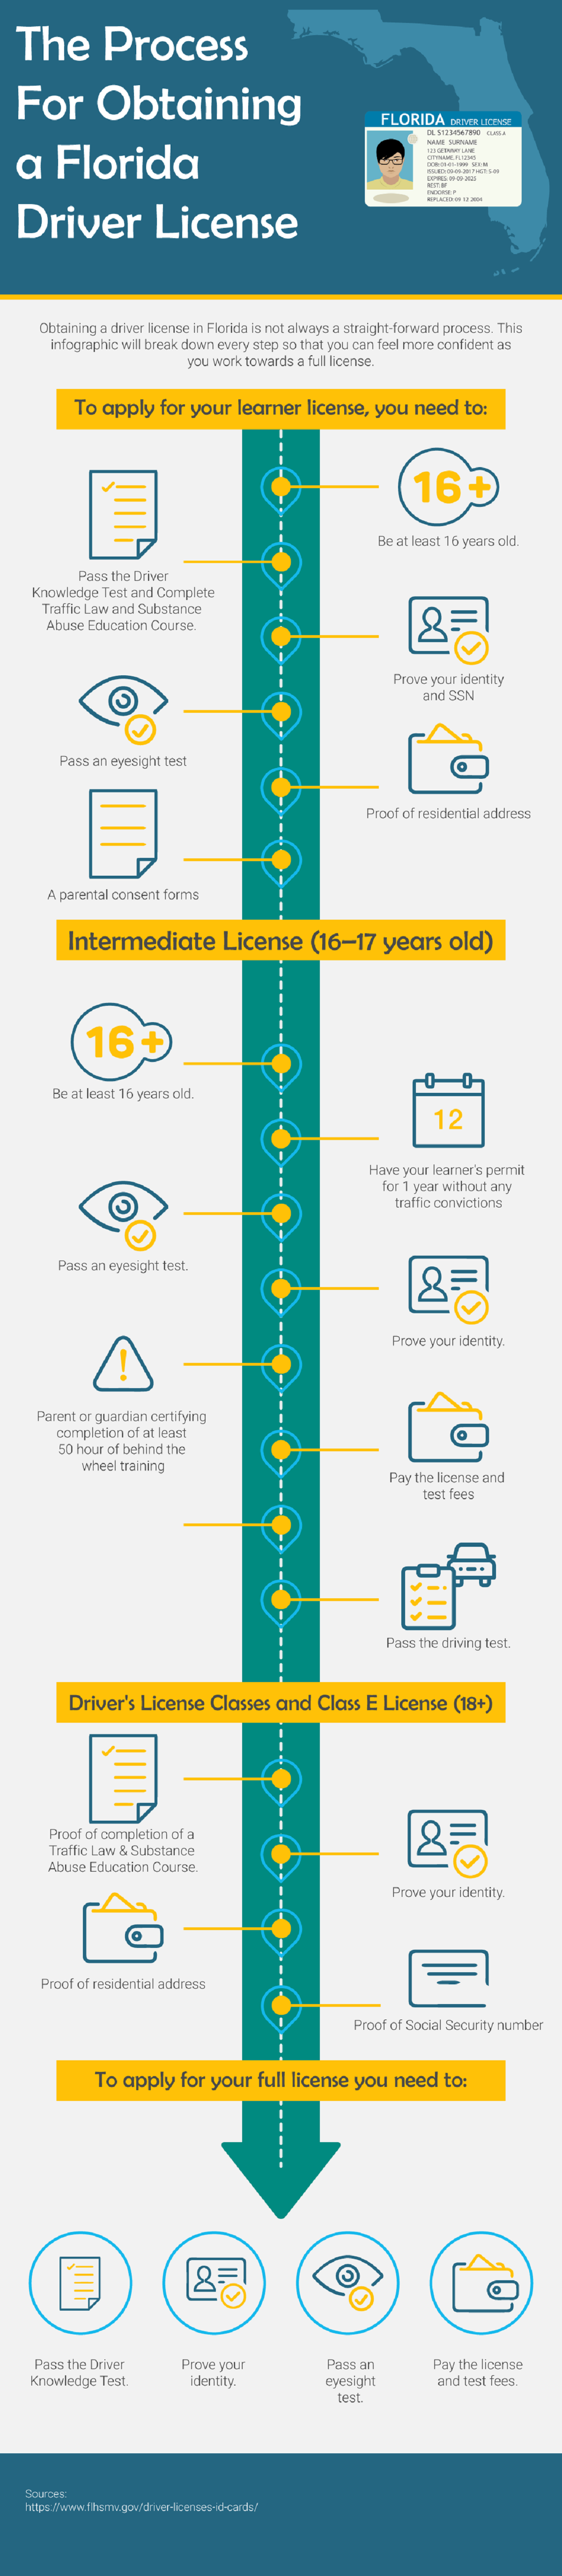 The Process For Obtaining a Florida Driver License #infographic